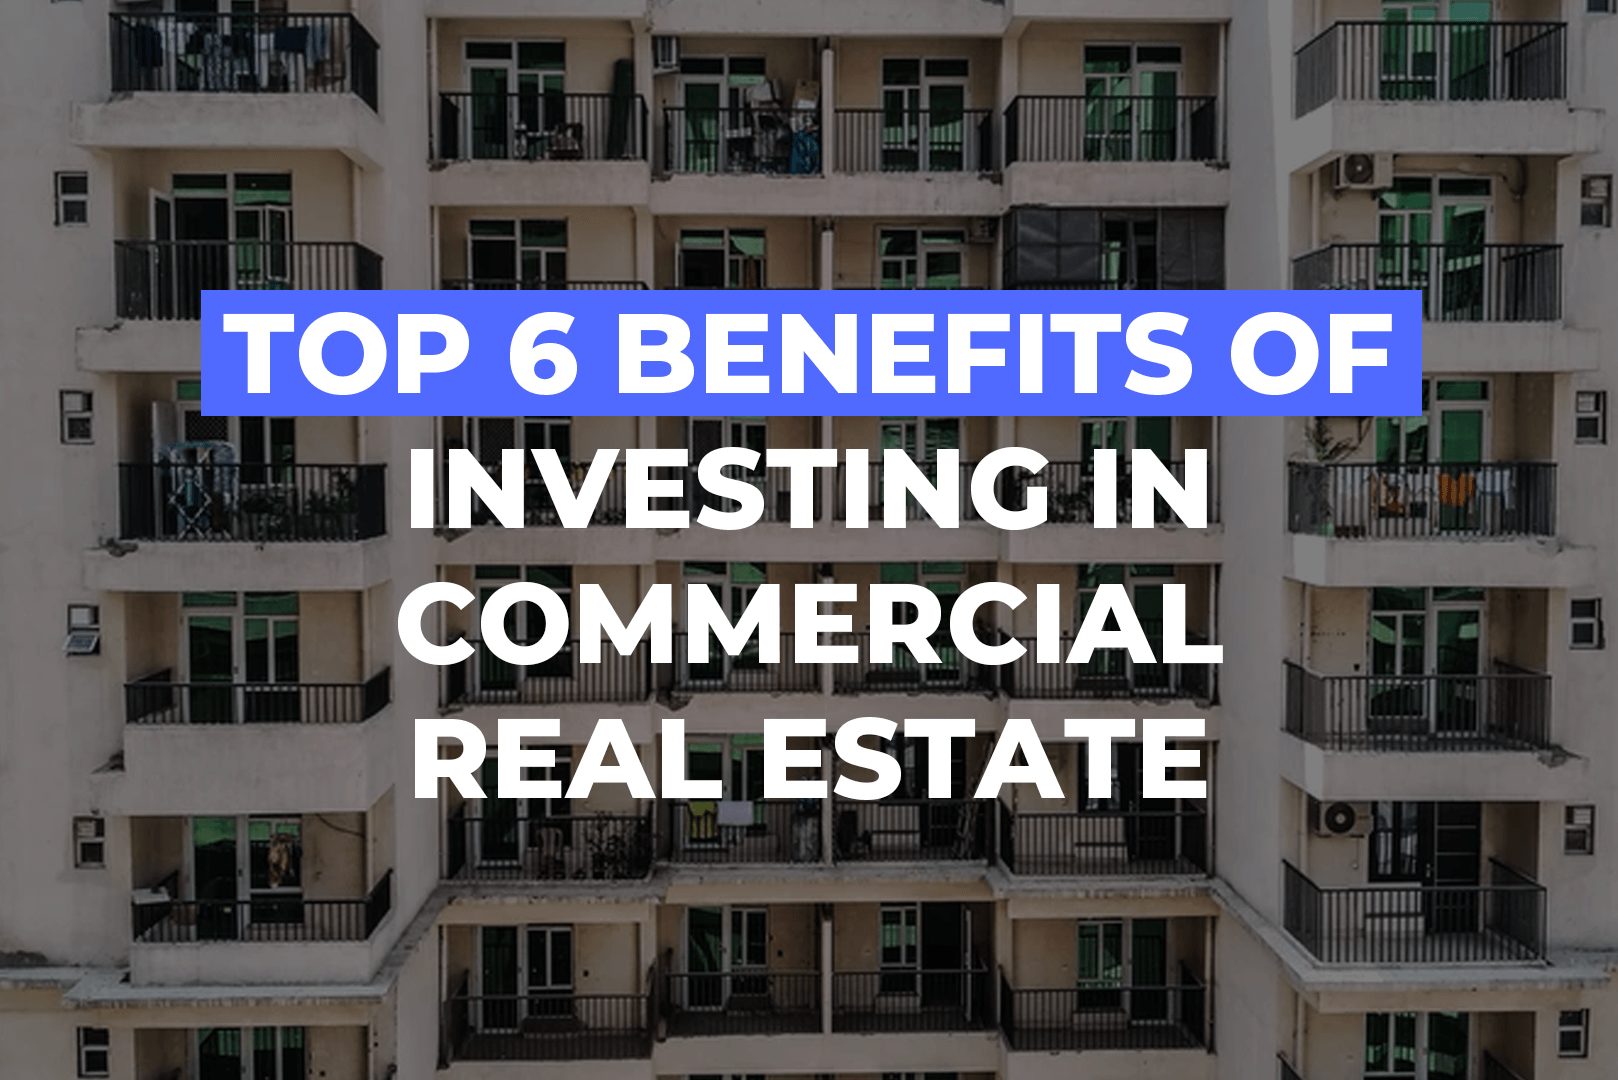 Top 6 Benefits Of Investing In Commercial Real Estate